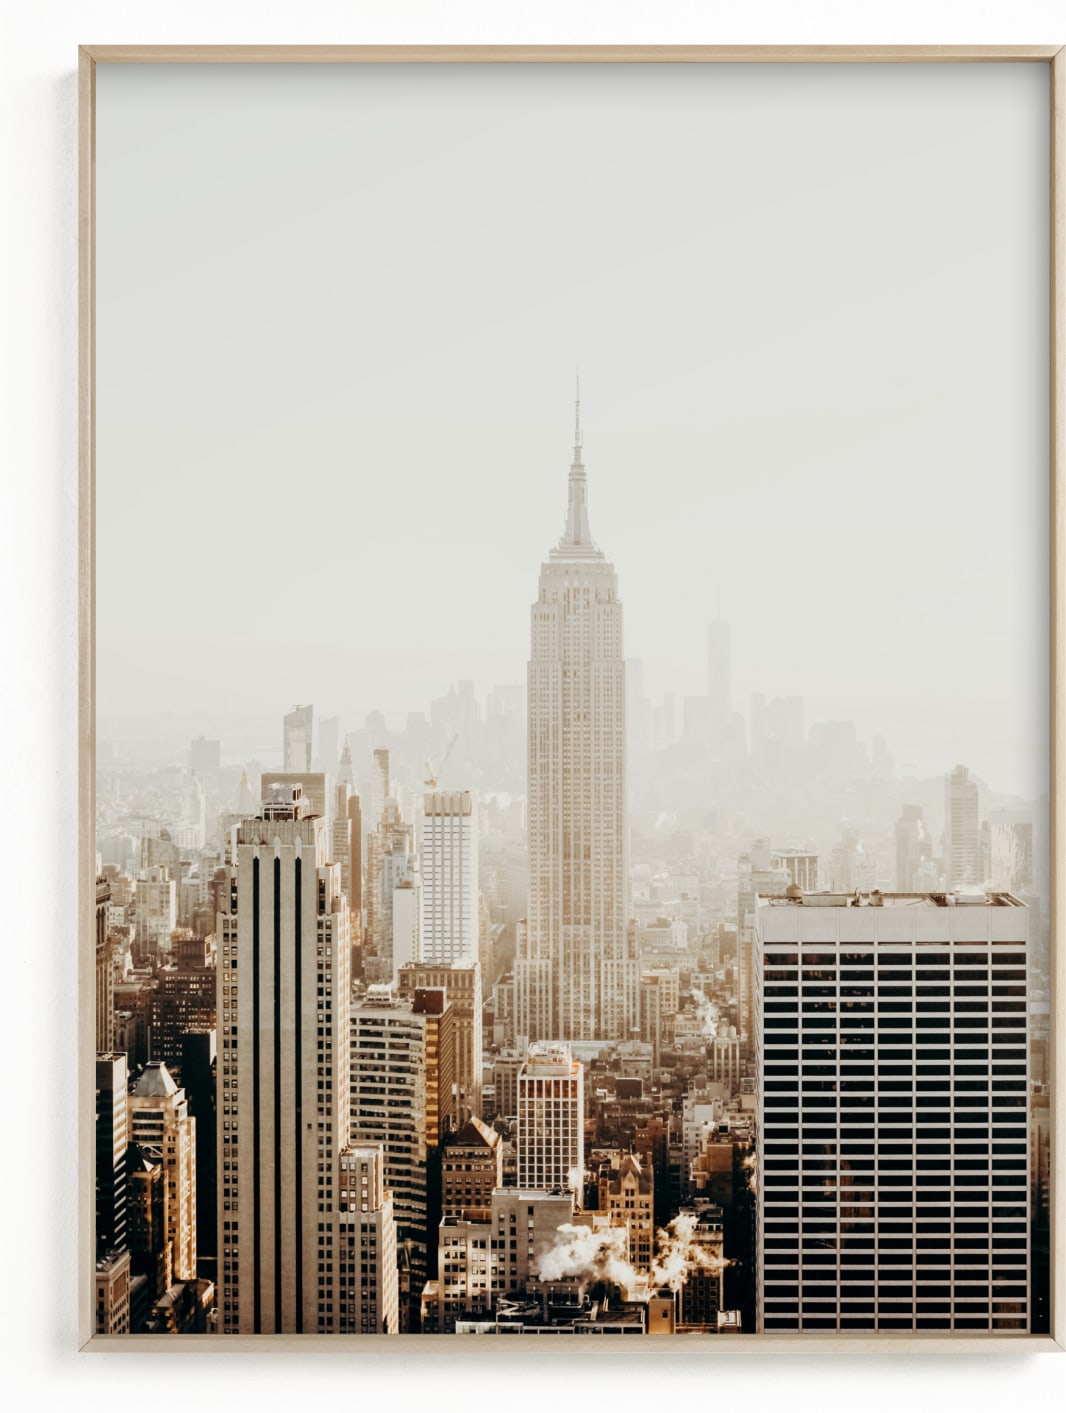 This is a brown art by Becca Frederick called New York City in Gold.